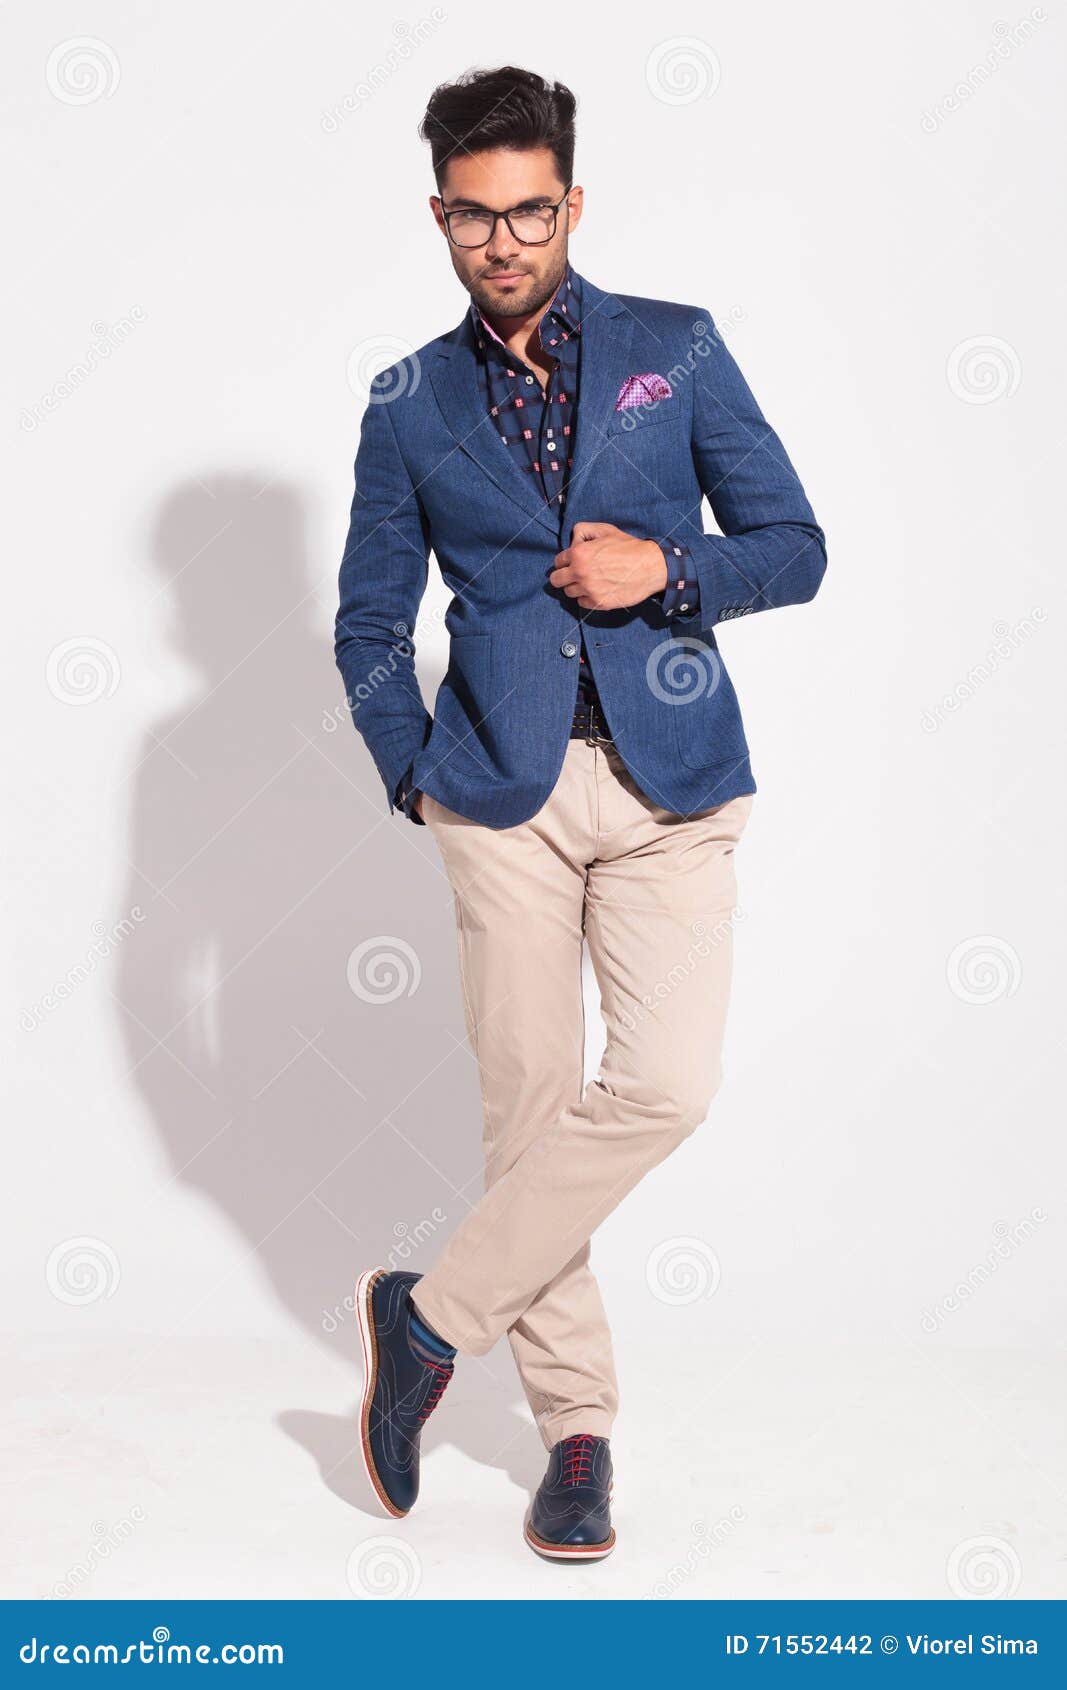 Young Fashion Male Model in Suit Holding Button Stock Photo - Image of ...